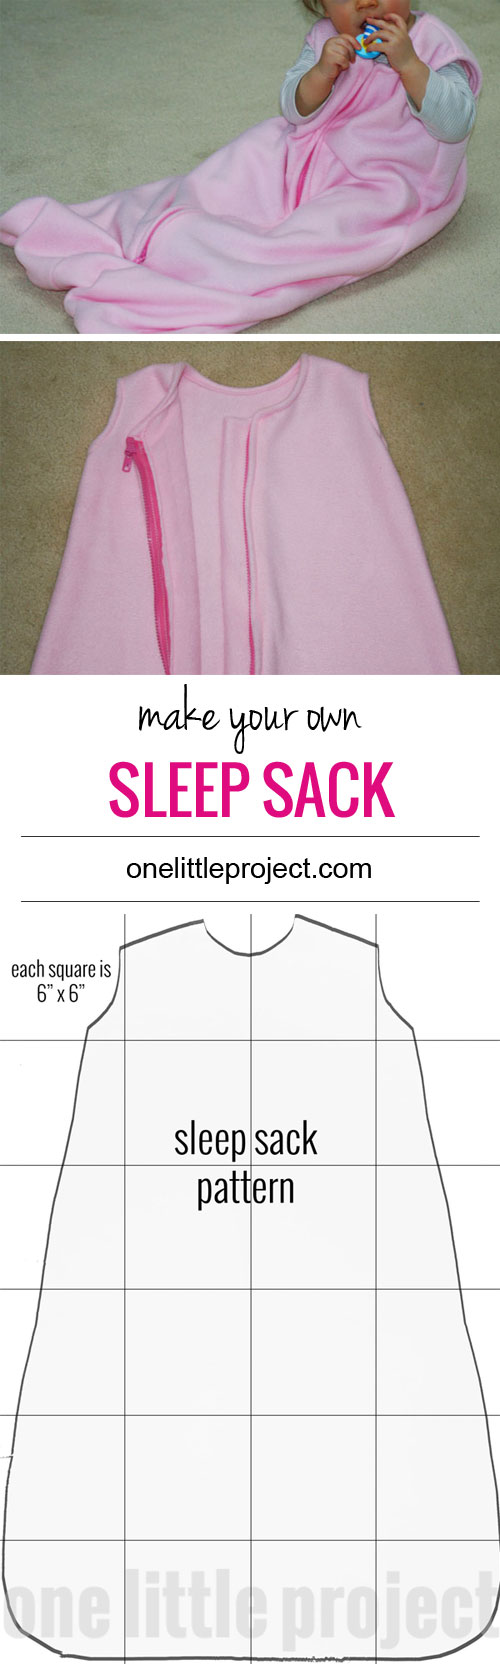 It's not that difficult to make your own sleep sack, so I decided to try it. It certainly beats paying $30 for another one!